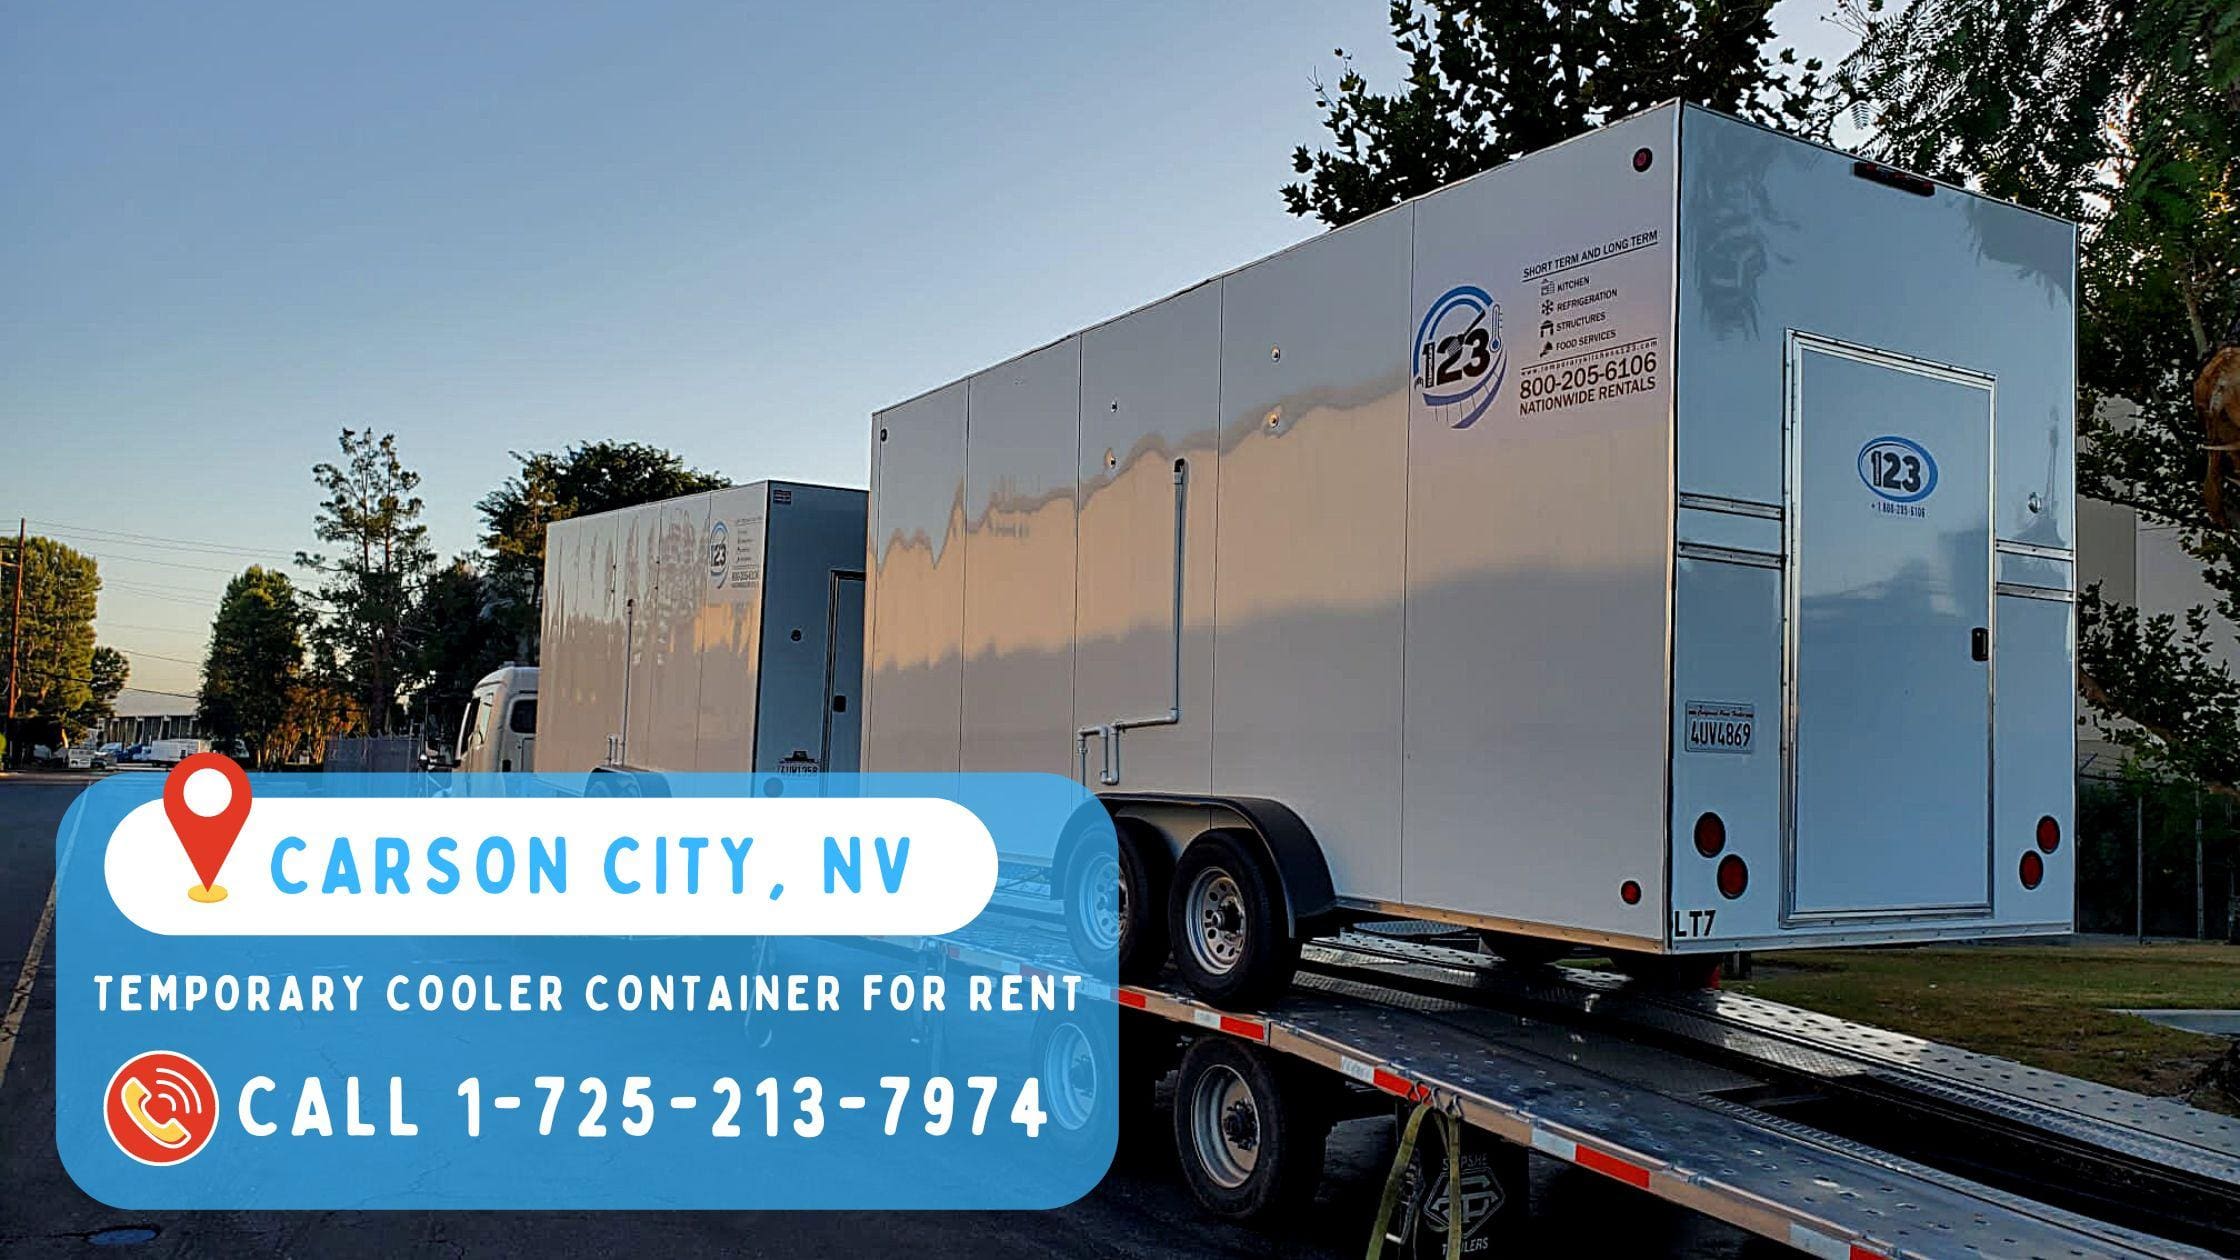 Temporary Cooler Container for Rent in Carson City